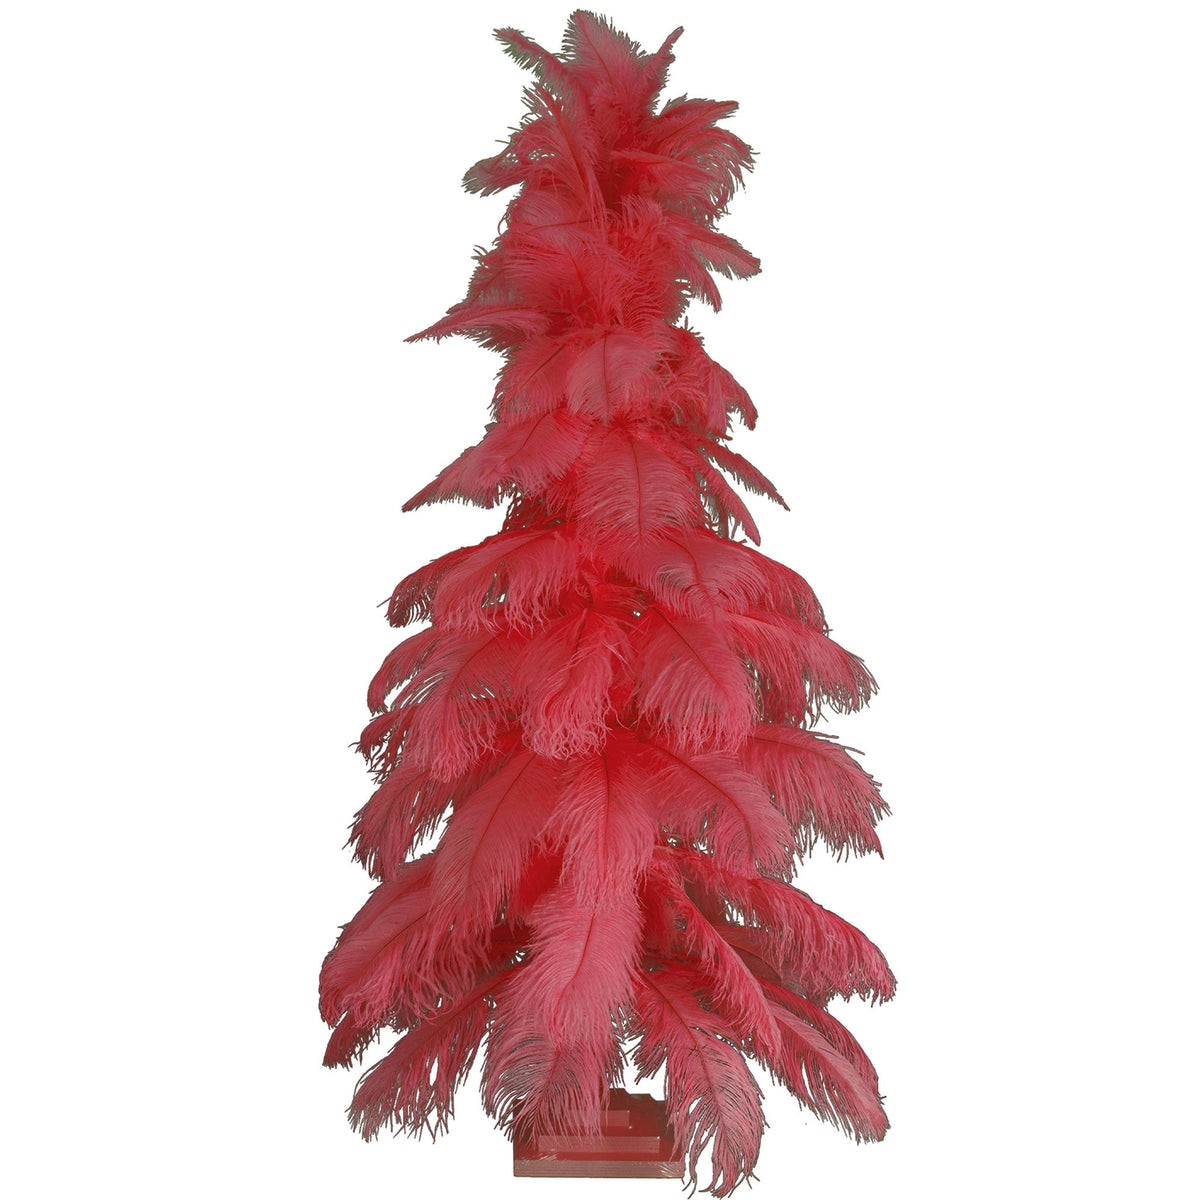 Introducing Lee Display's brand new 4ft tall Red Ostrich Feather Christmas Trees! Made with real ostrich feathers